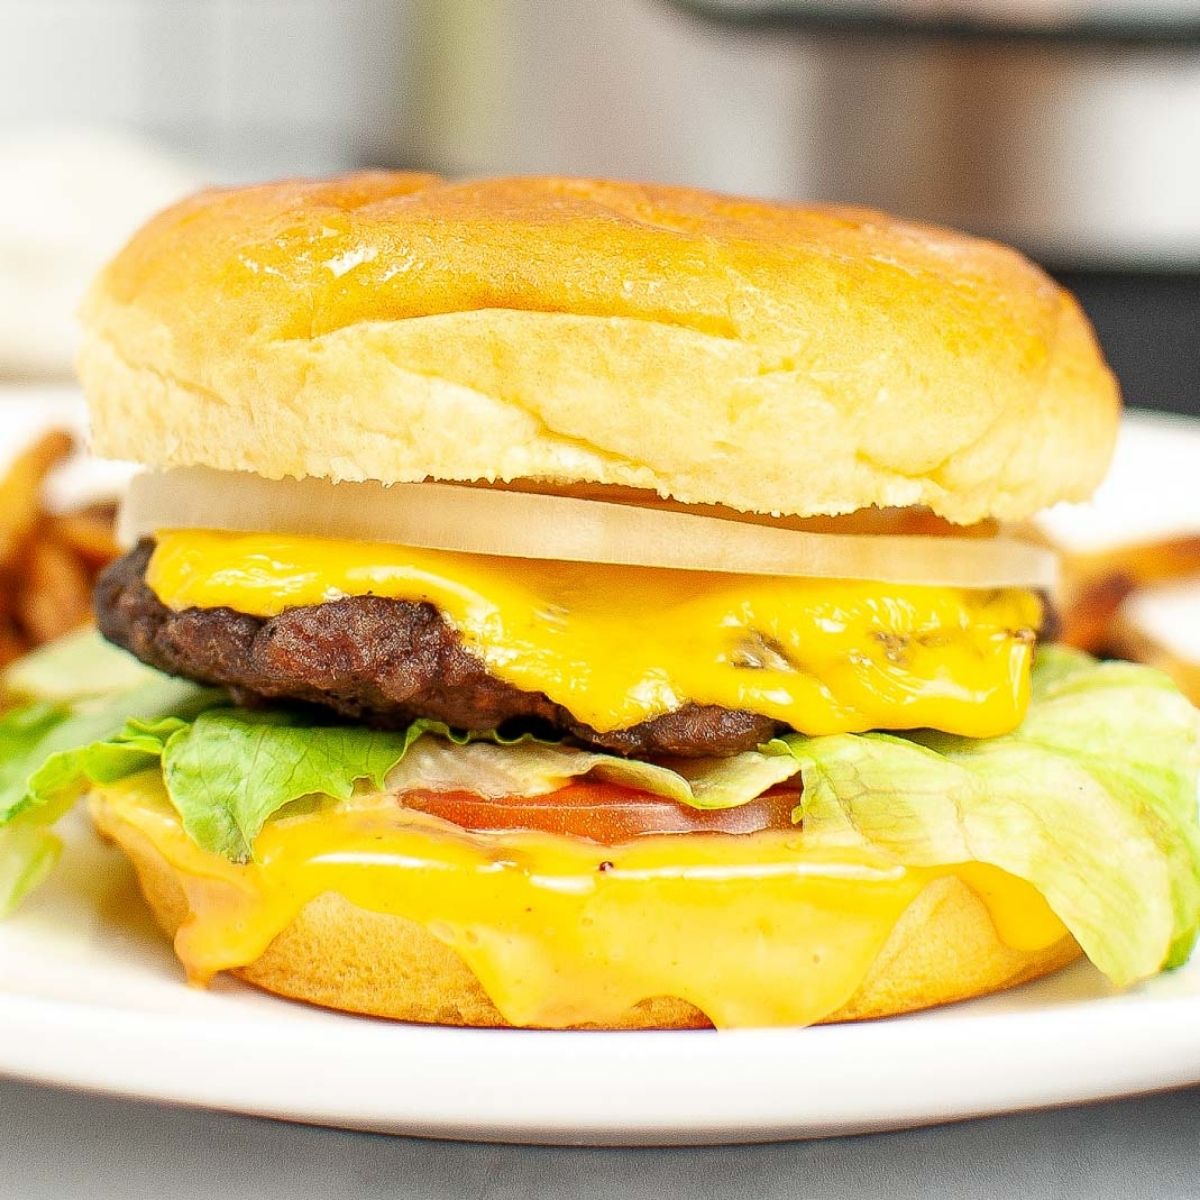 Cheeseburger made in the Instant Pot.